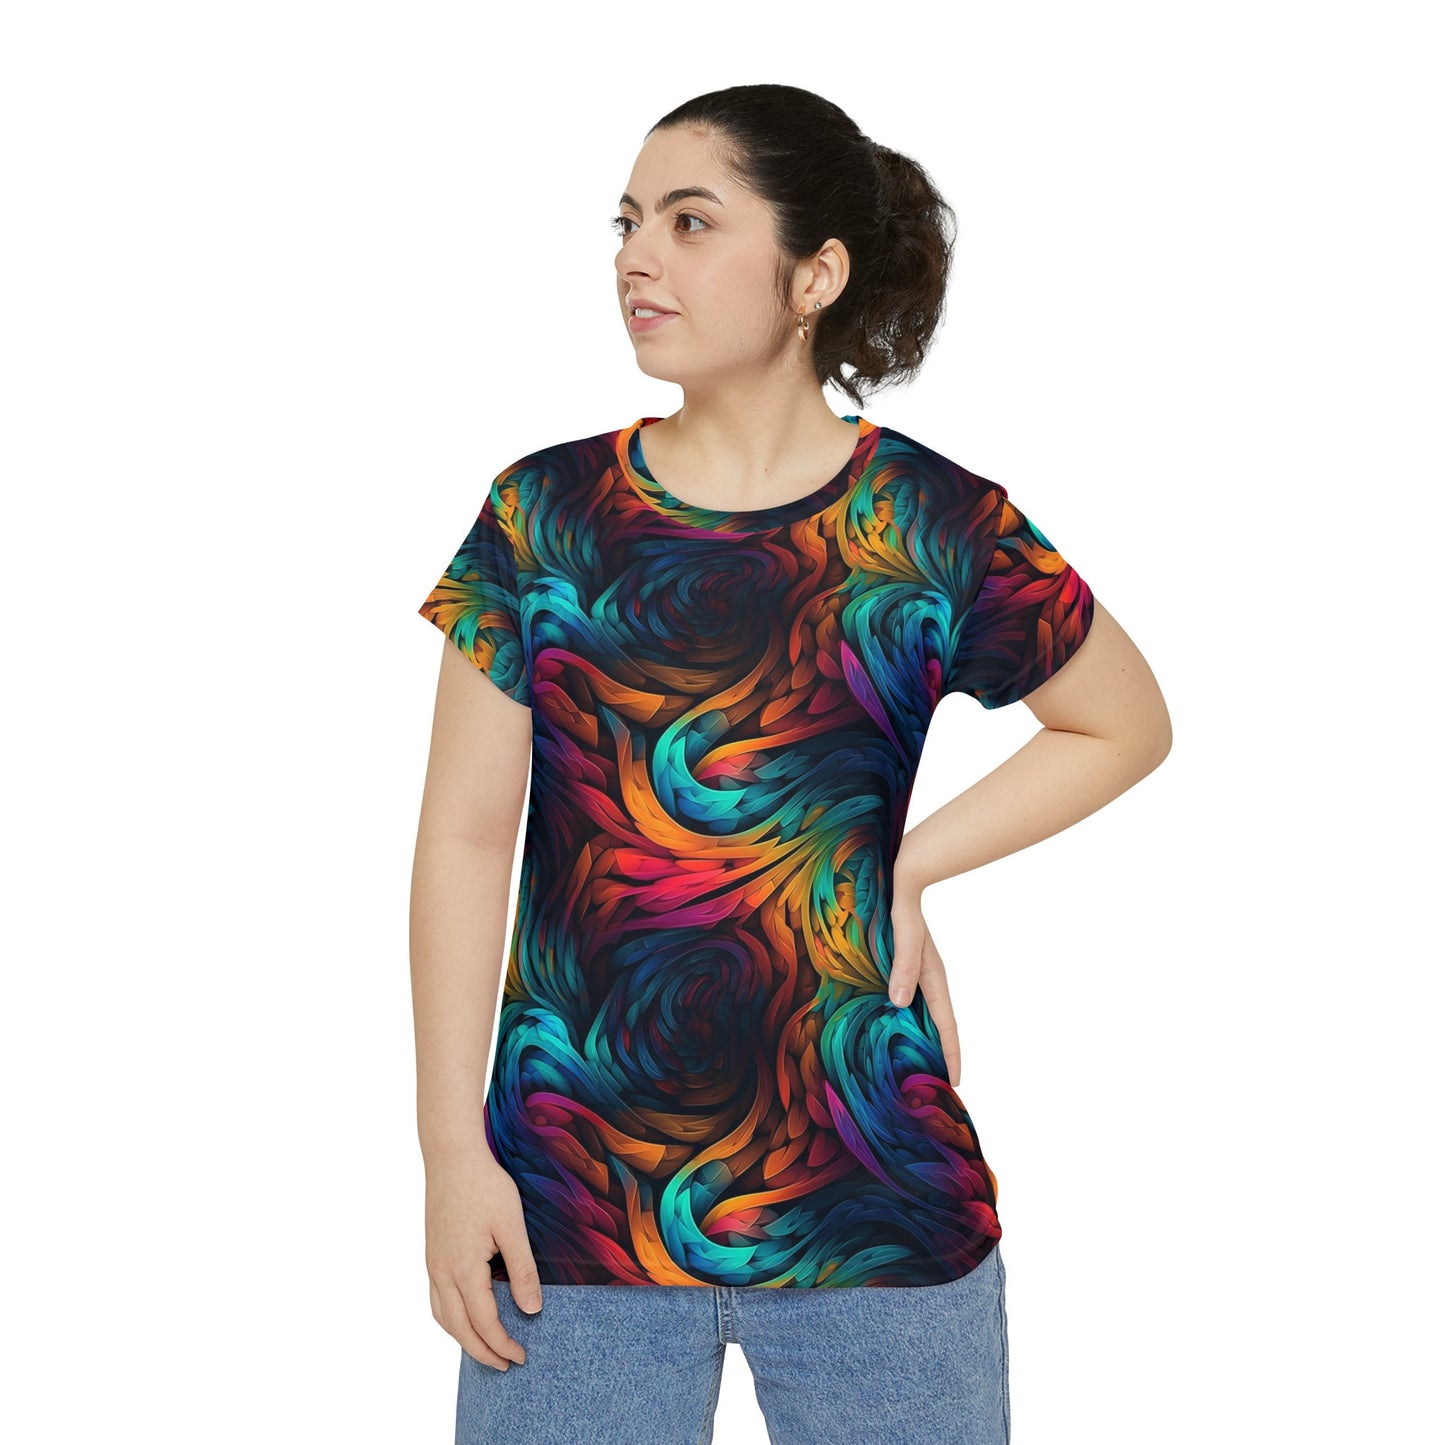 Sublimated T Shirt for Festivals, Raves, Events | Melt | Women's Streetwear, Heady, Trippy T-Shirt, Sublimated T-Shirt, Rave Wear